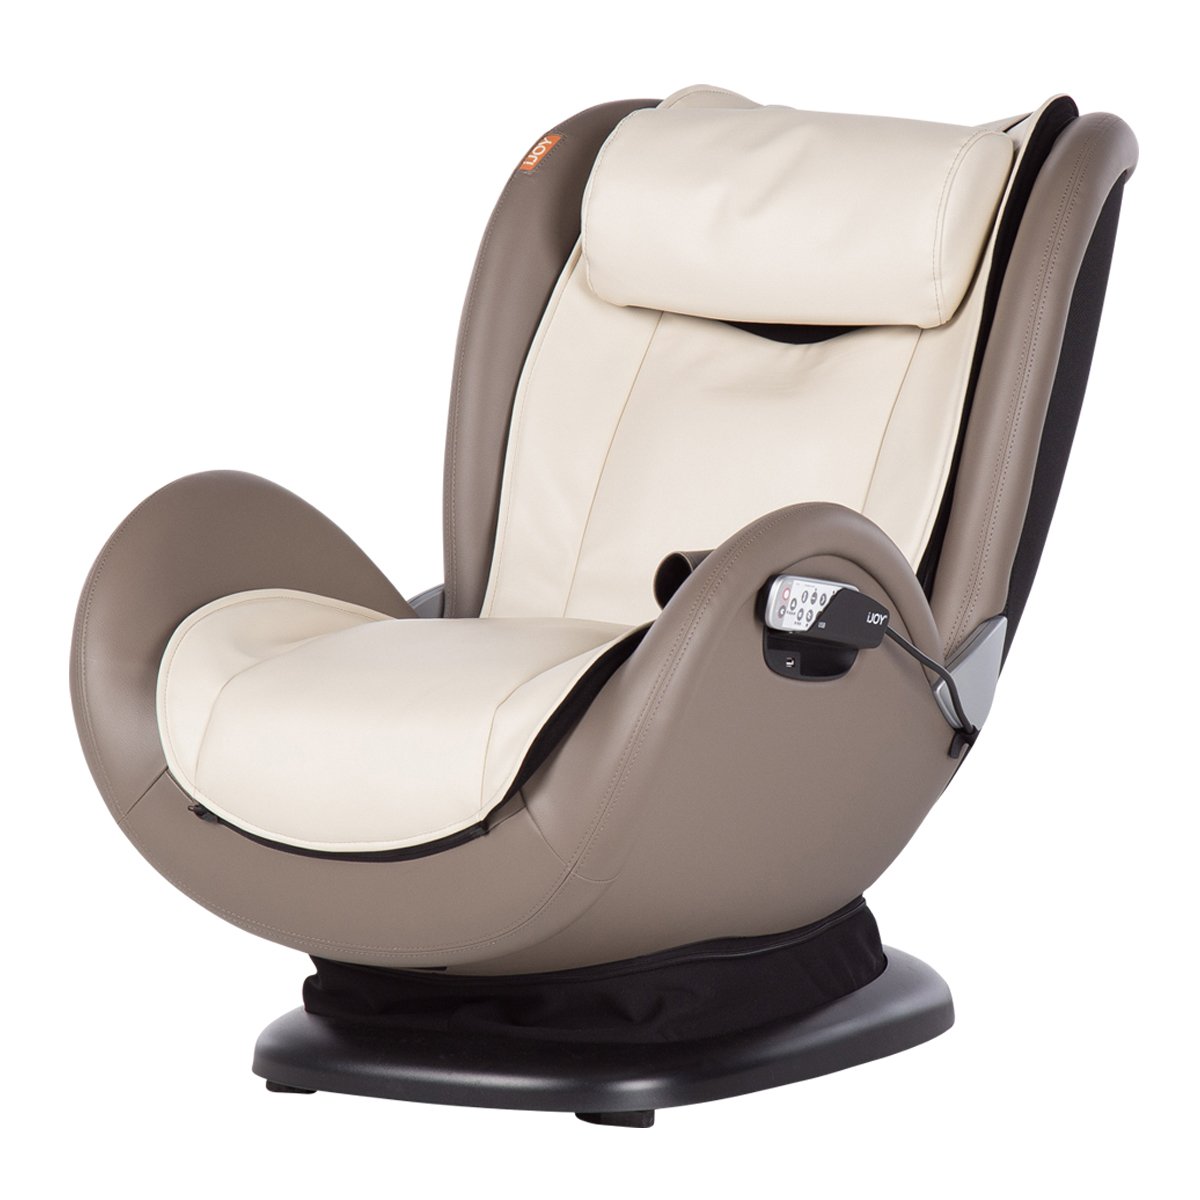 Human Touch iJOY 4.0 Massage Chair